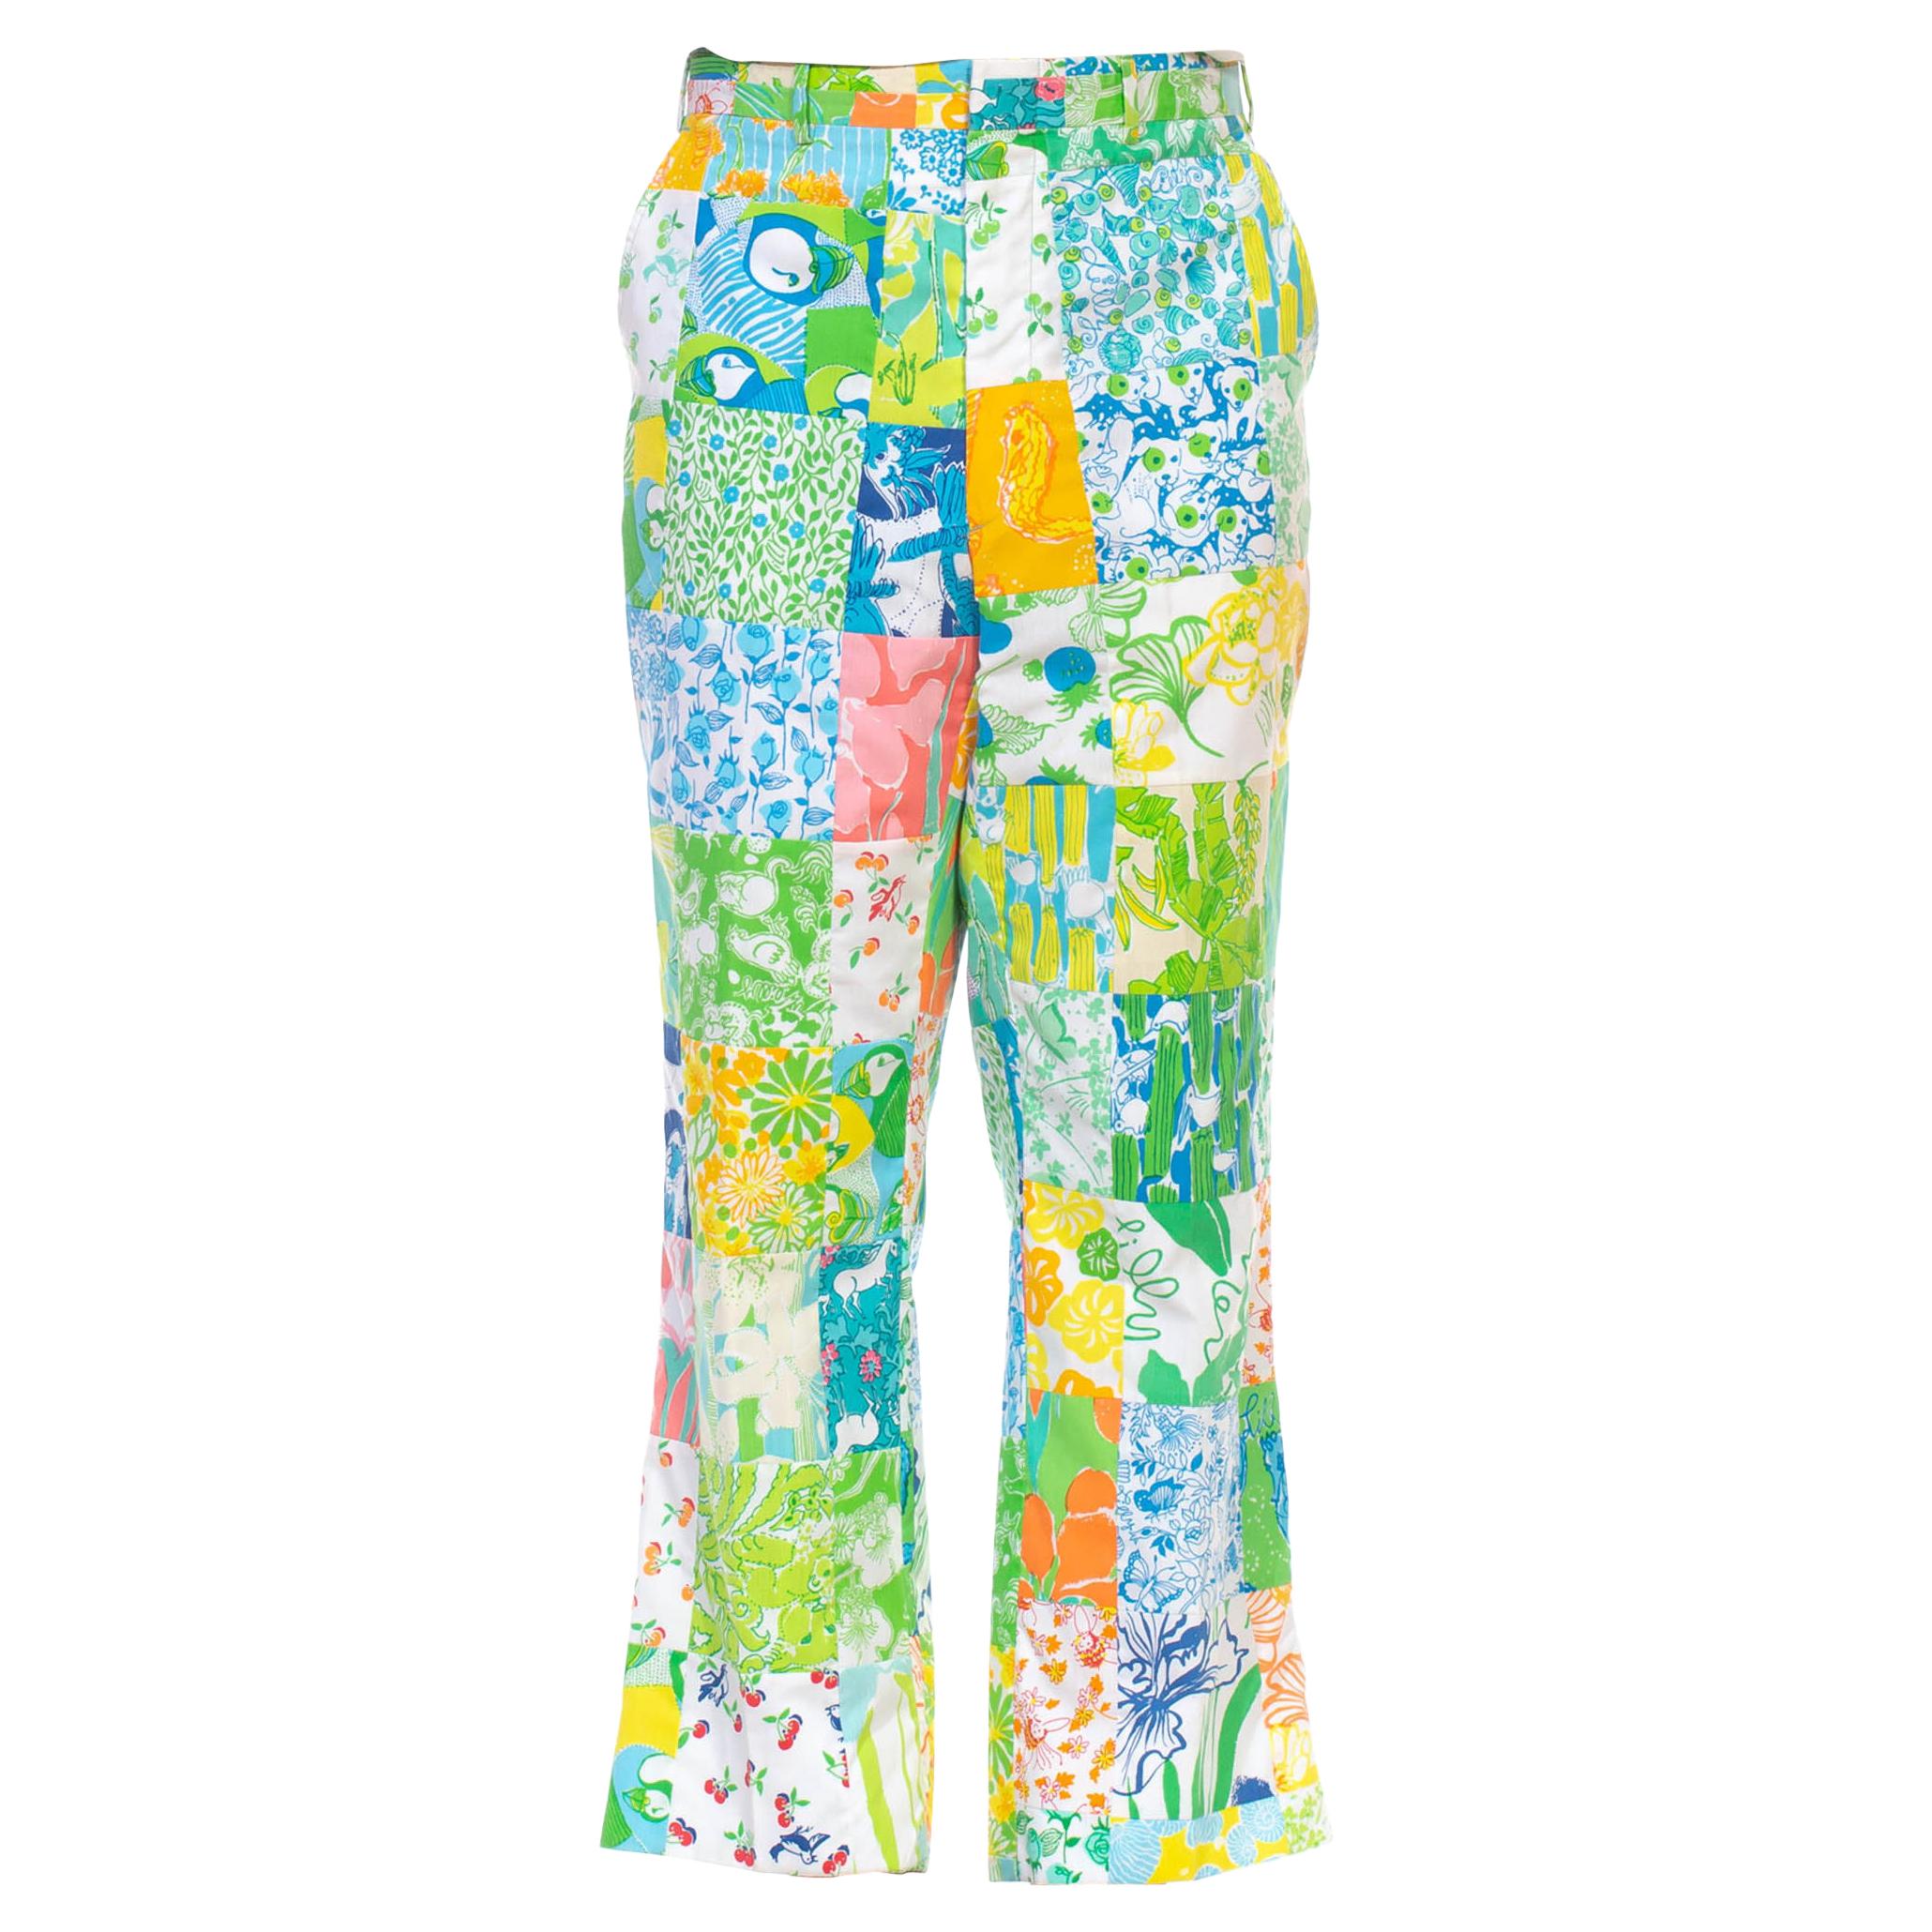 1960S LILLY PULITZER Bright Multicolor Cotton Patchwork Pants